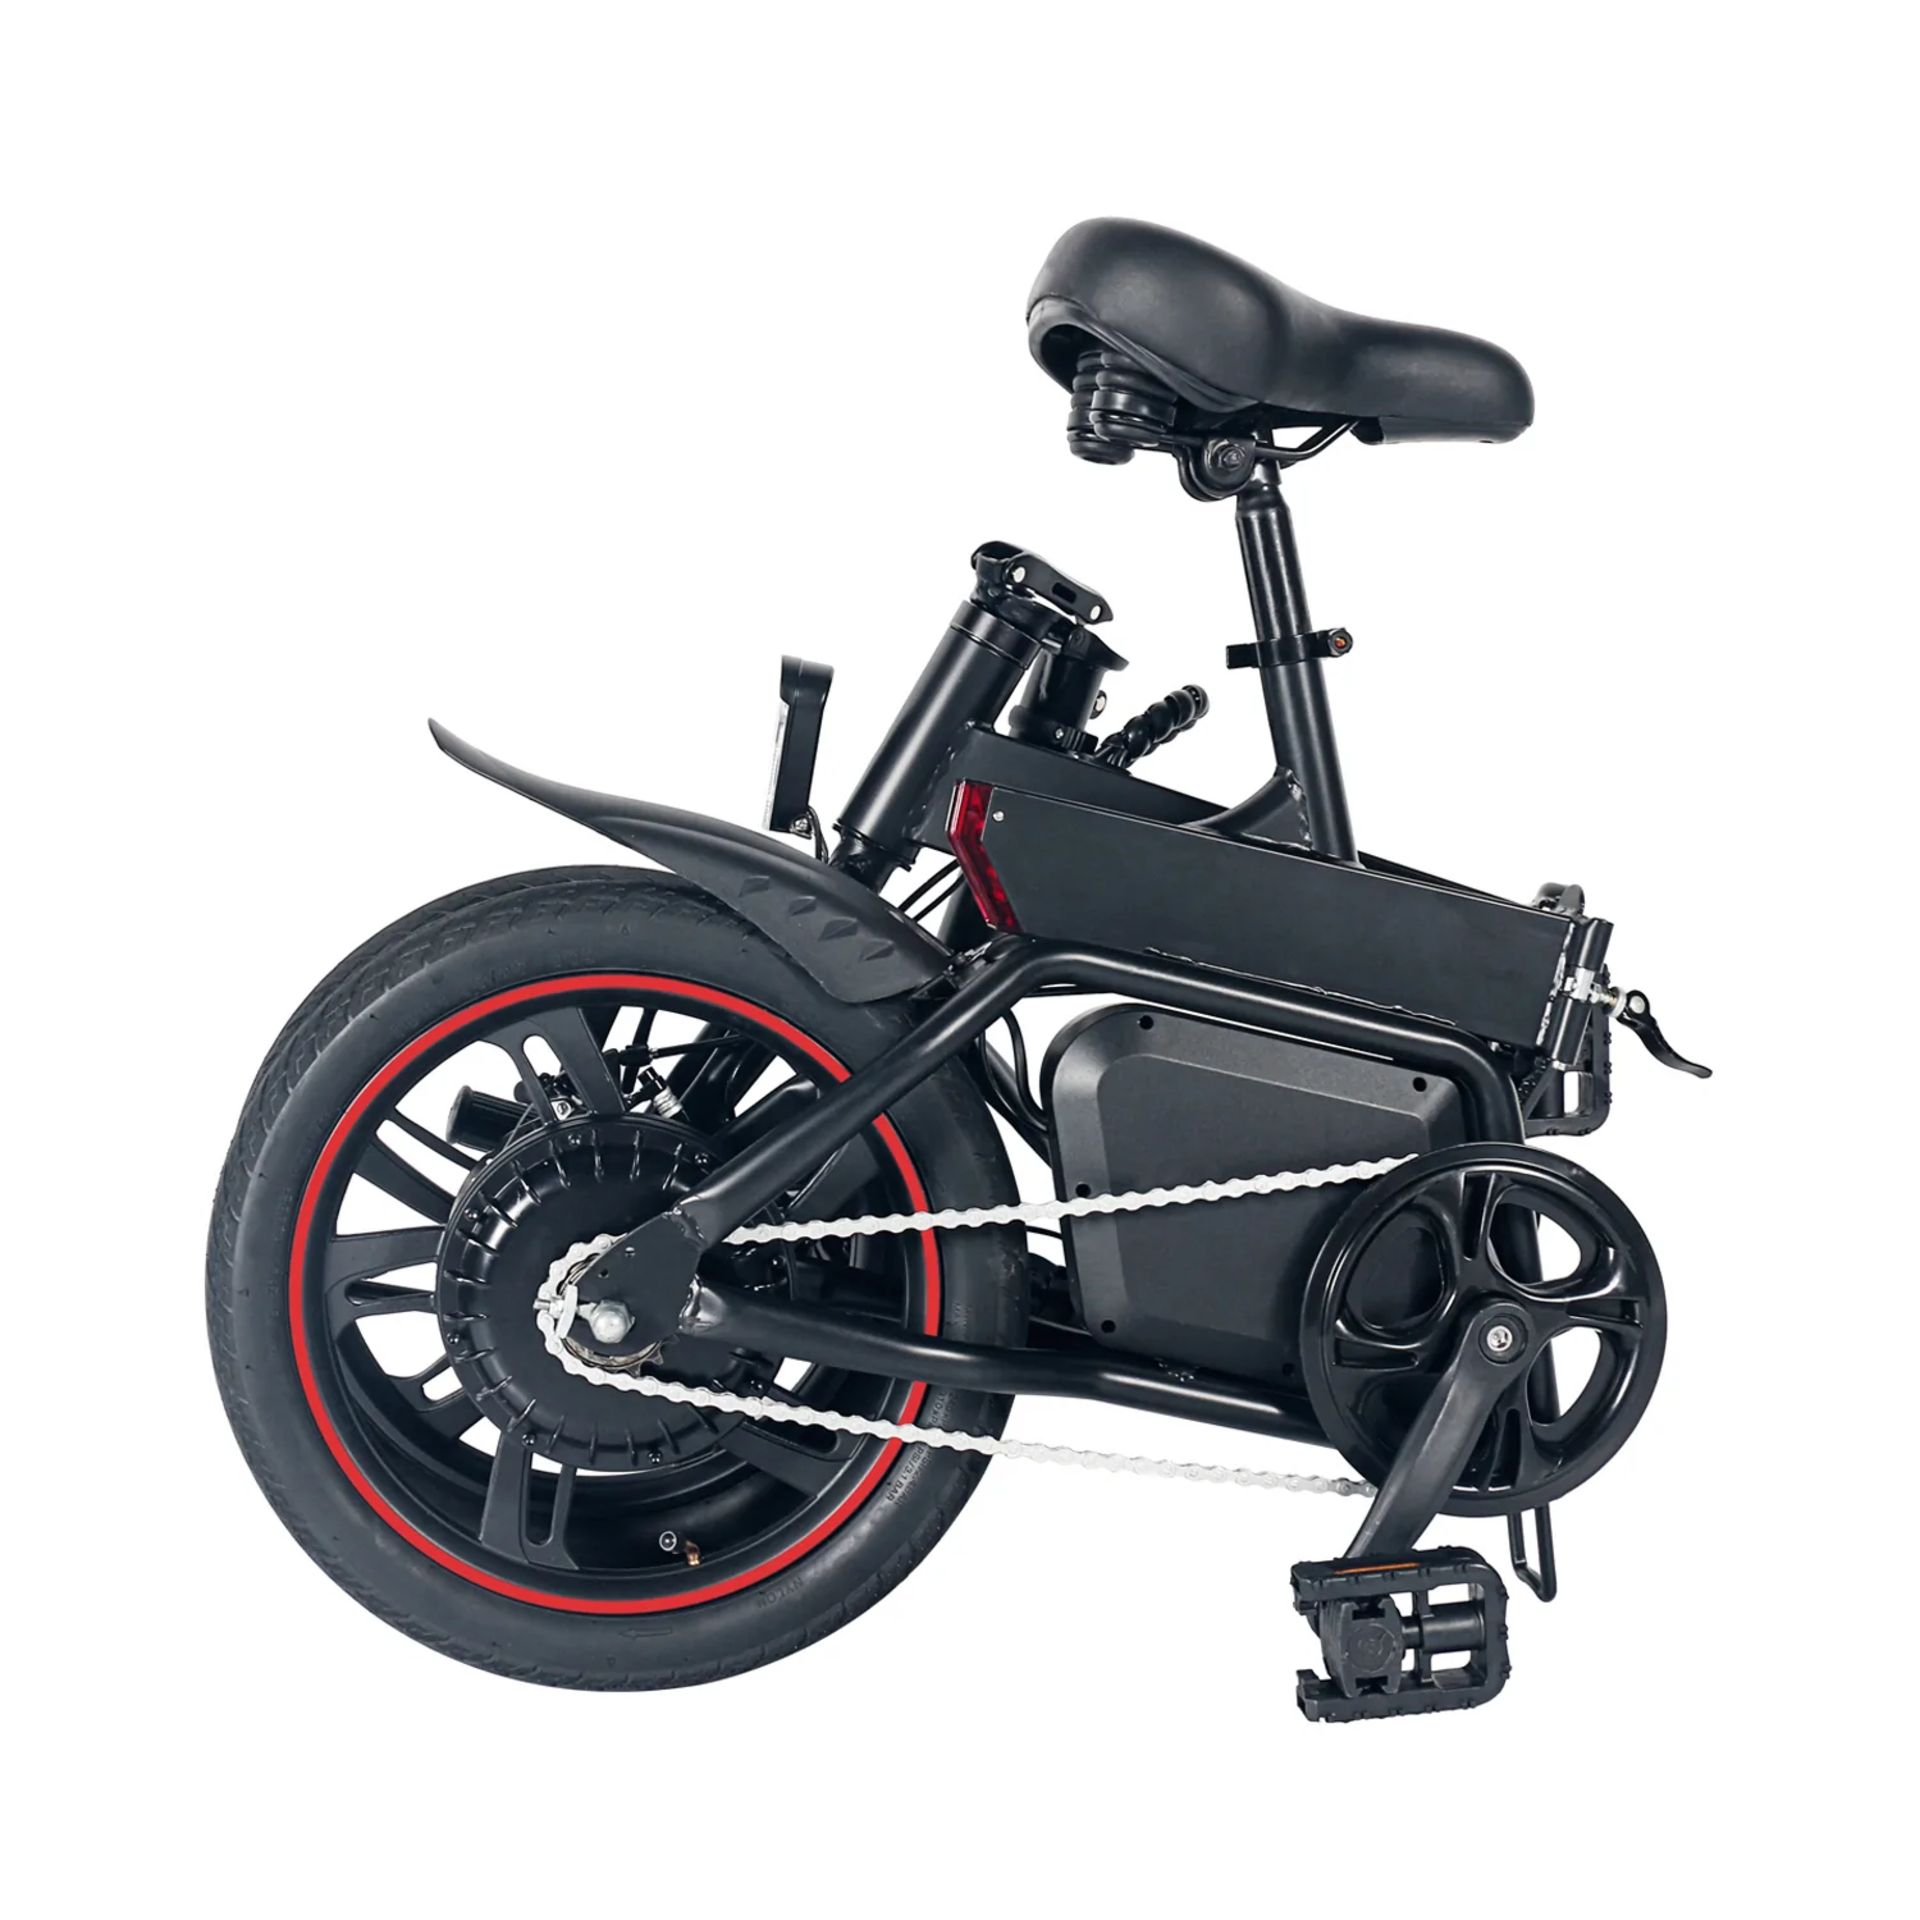 Windgoo B20 Pro Electric Bike. RRP £1,100.99. With 16-inch-wide tires and a frame of upgraded - Image 3 of 7